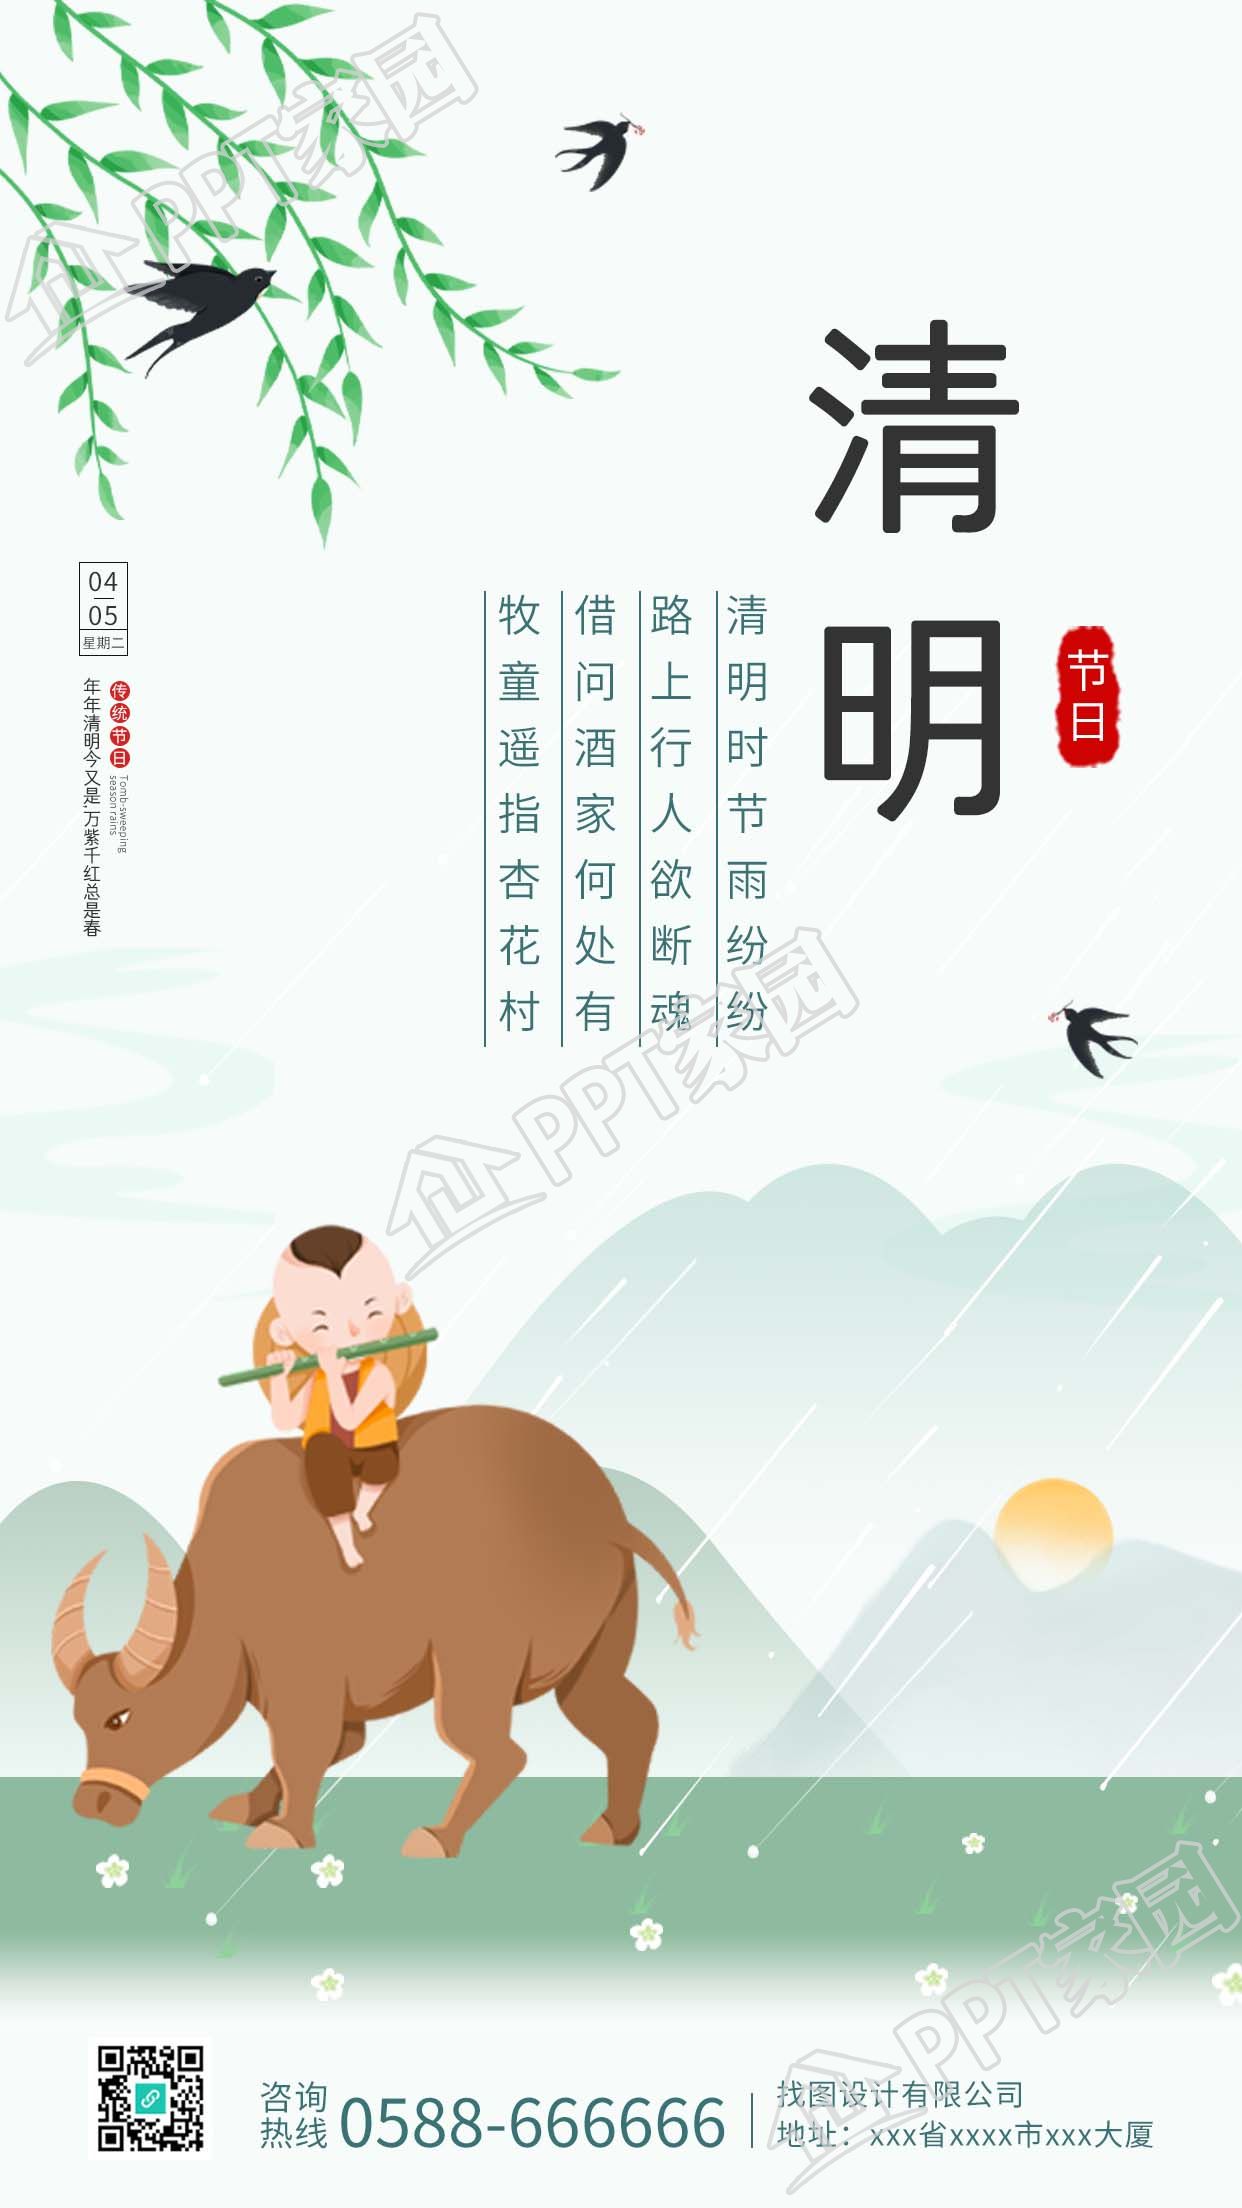 Fresh green Ching Ming Festival traditional festival poetry pictures mobile poster download recommended